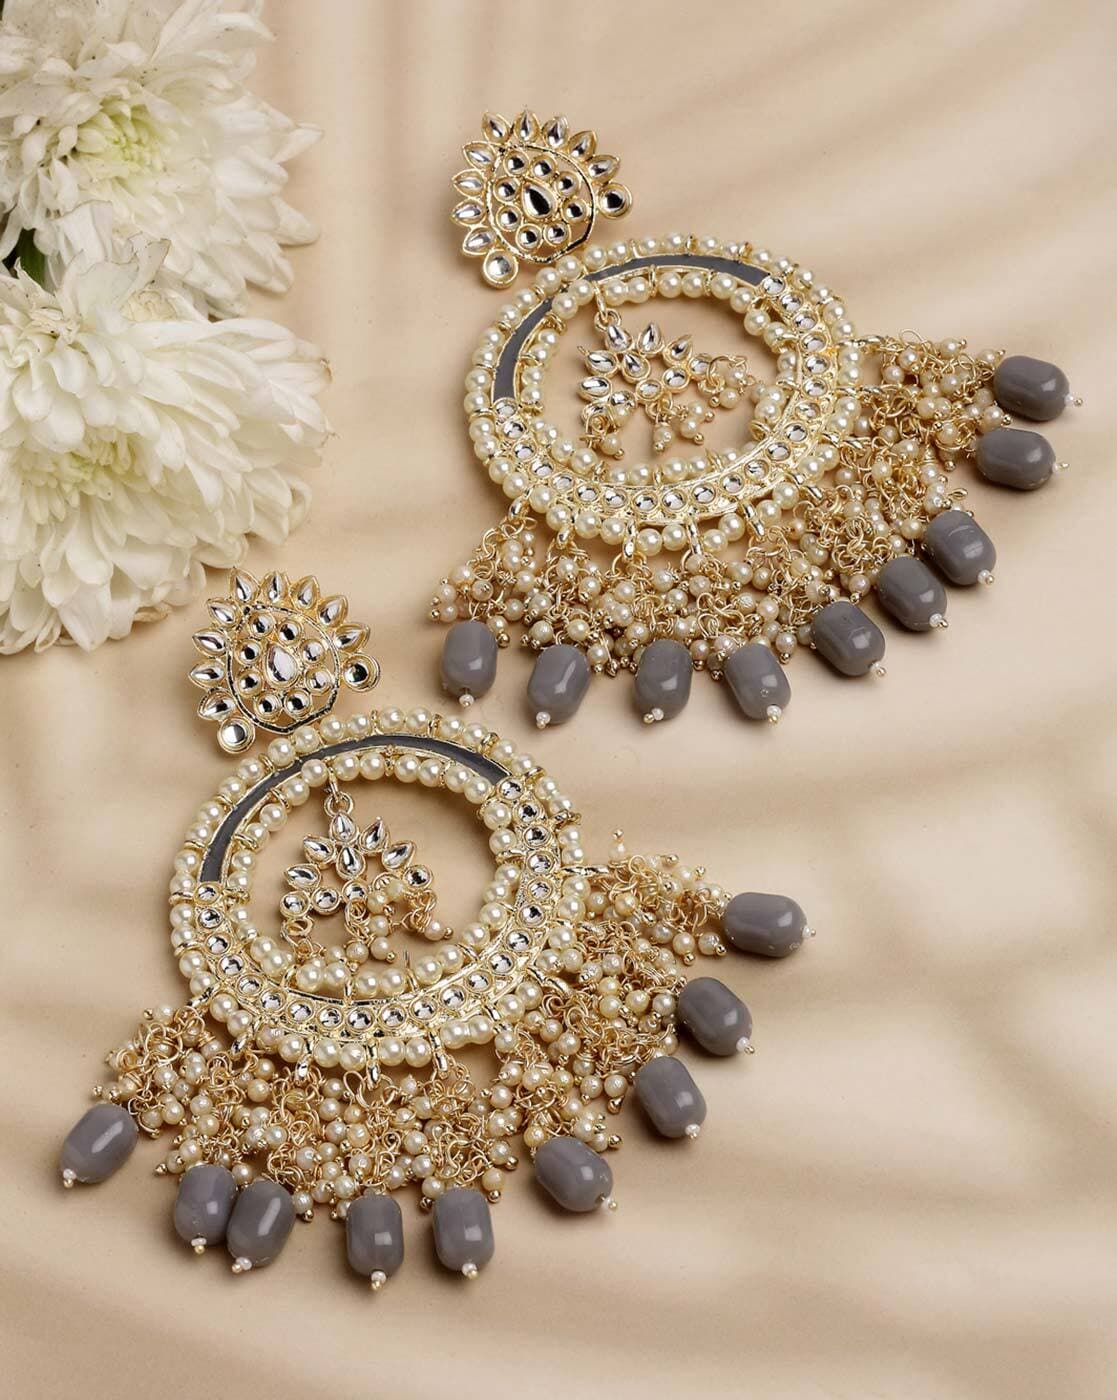 Flipkart.com - Buy CRUNCHY FASHION Traditional Gold-Plated White & Grey  Pearl Pasa Earrings Alloy Drops & Danglers Online at Best Prices in India